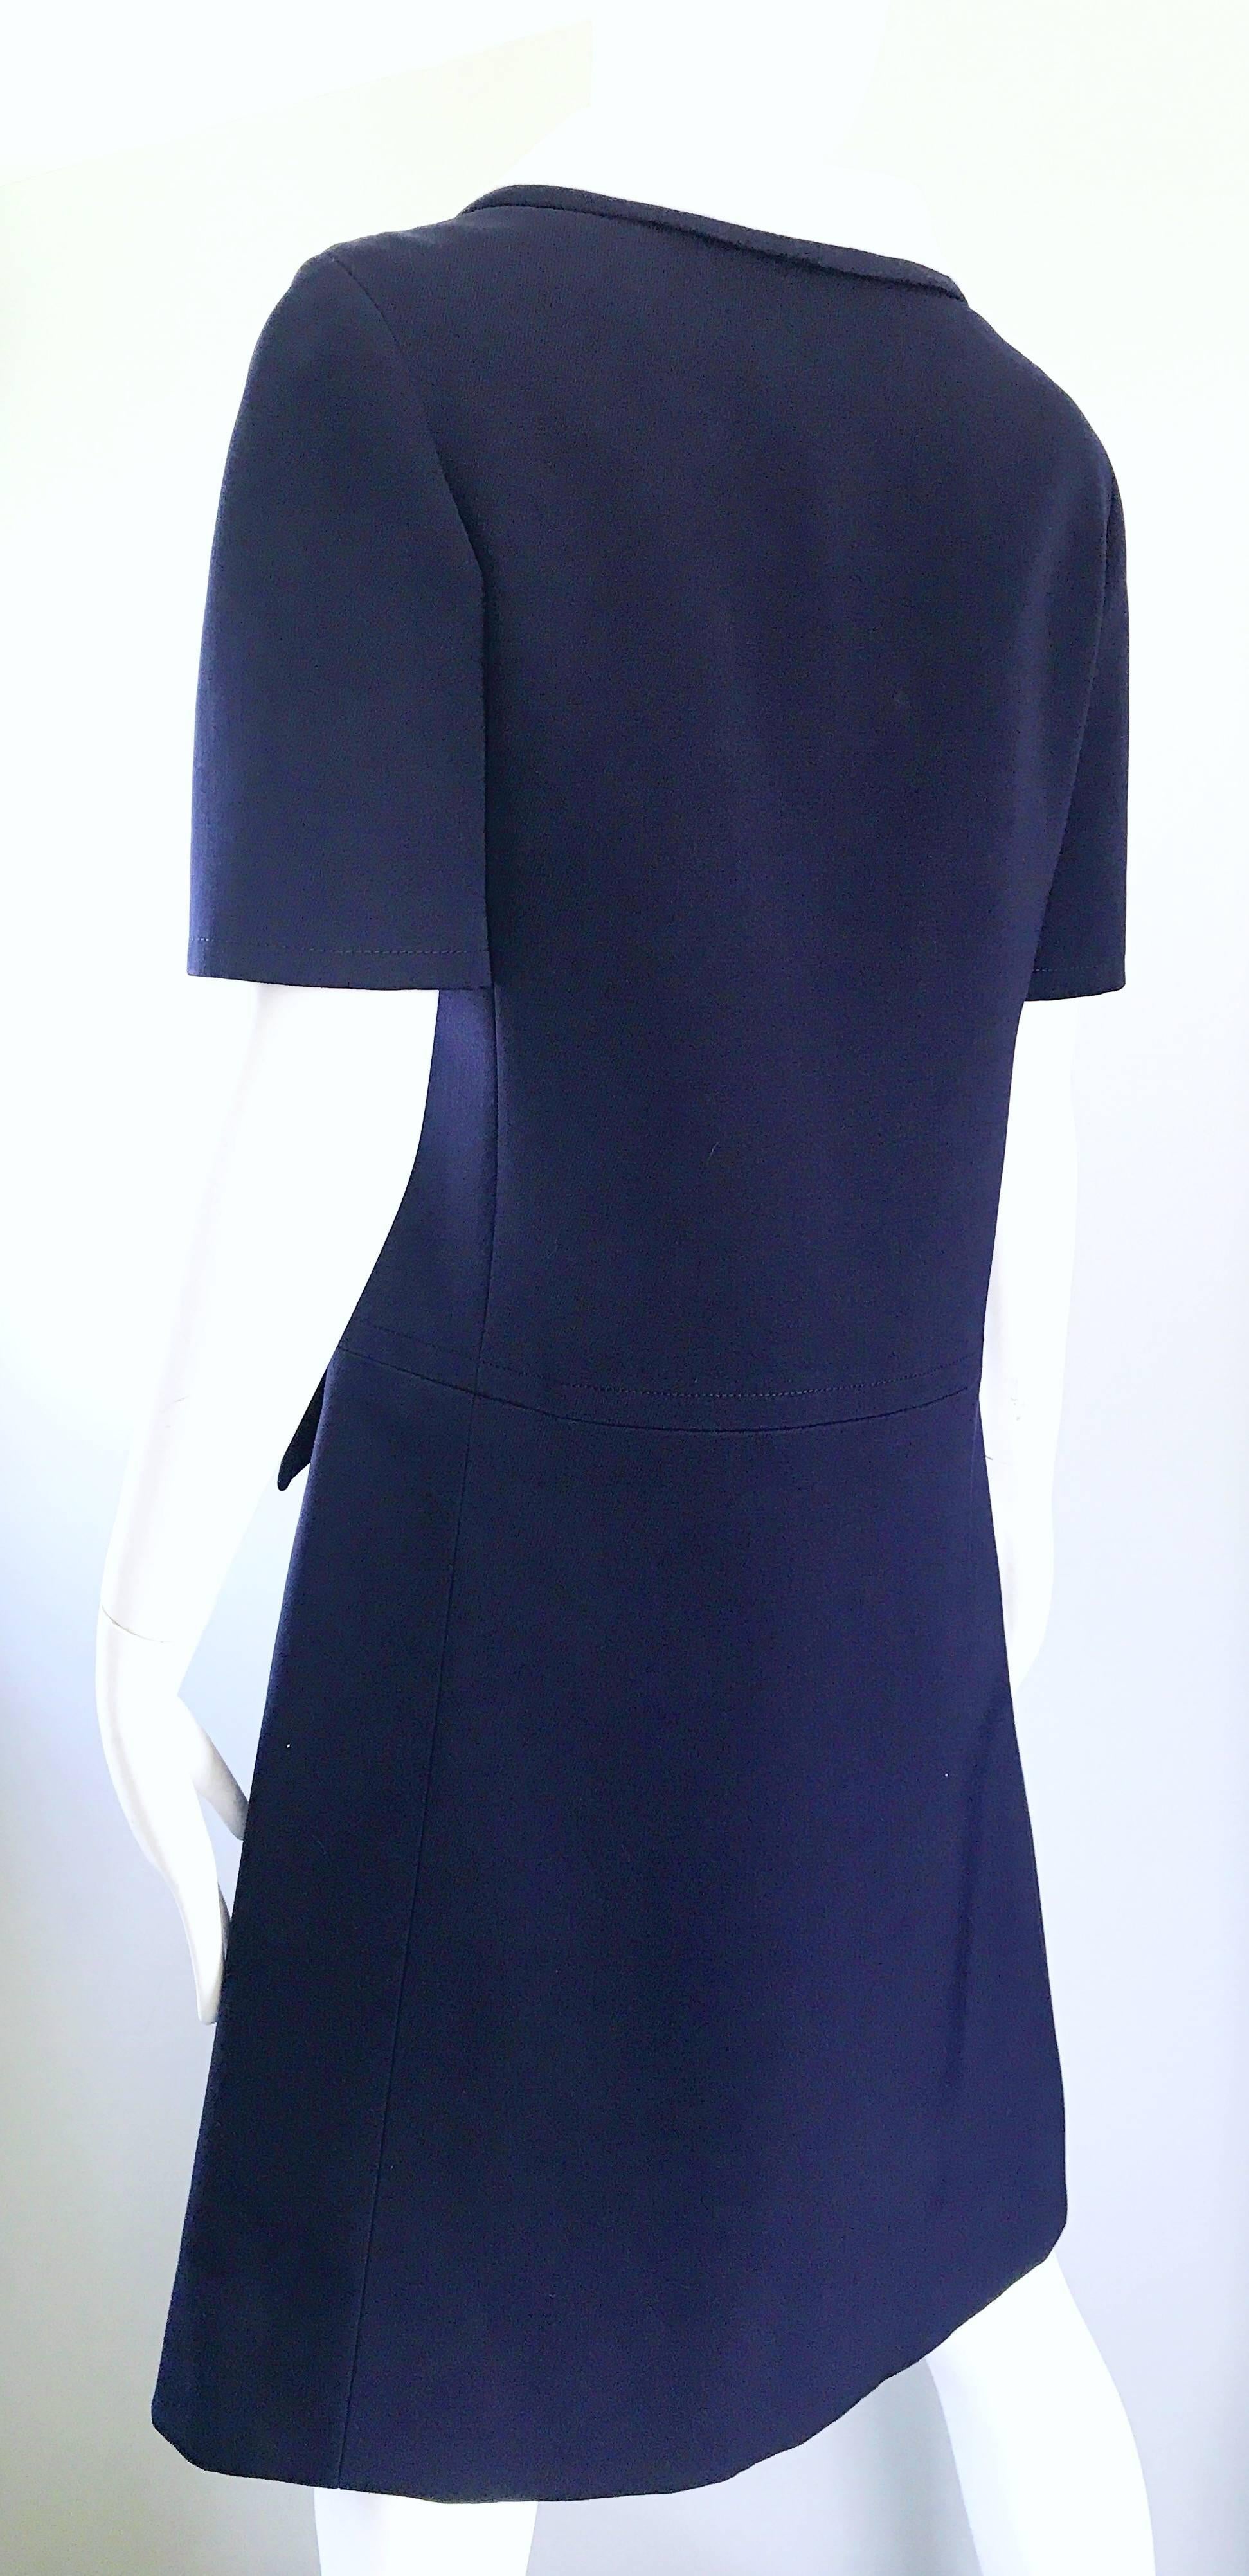 Women's Yves Saint Laurent Haute Couture Navy Blue and White Nautical Dress, 1960s For Sale